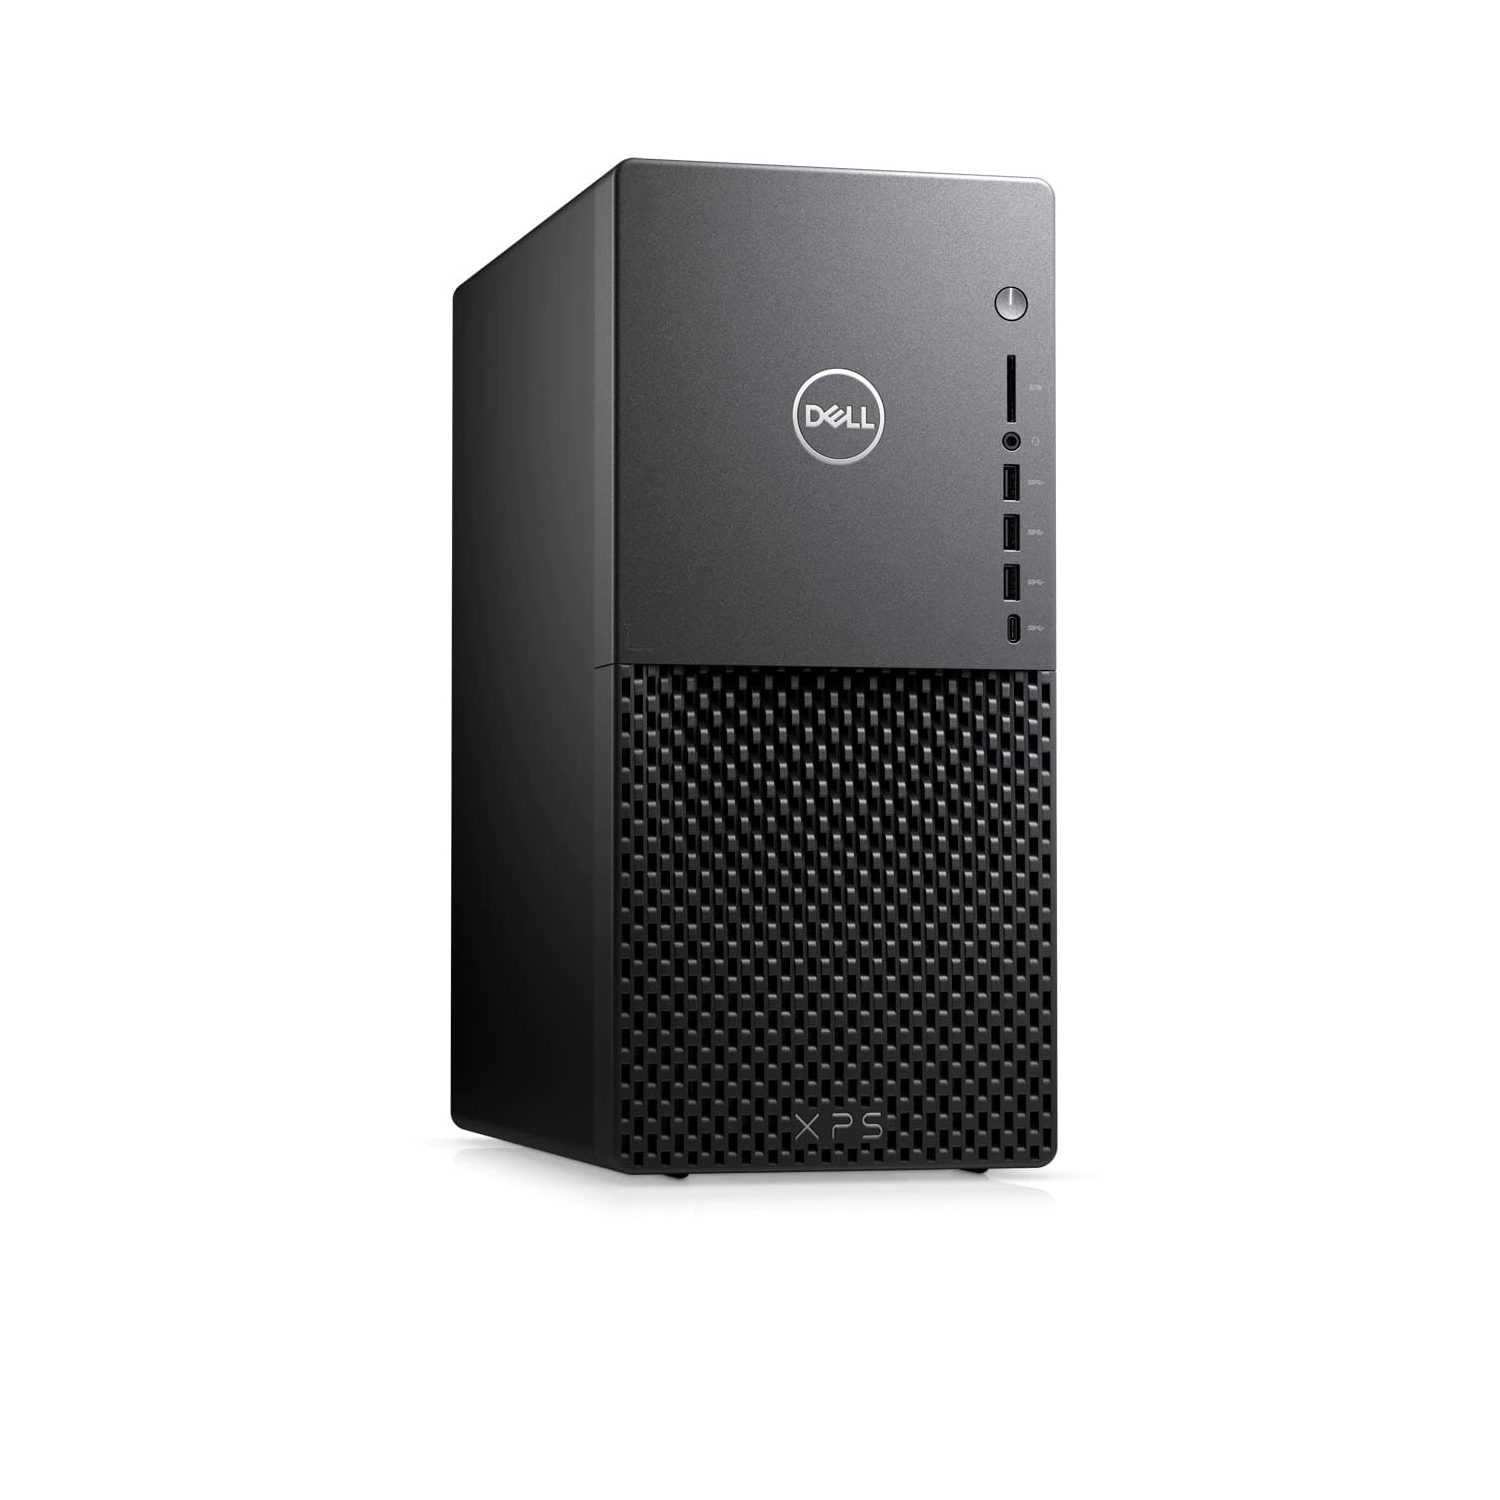 Refurbished (Excellent) - Dell XPS 8940 Desktop (2020) | Core i7 - 512GB SSD - 32GB RAM - RTX 3060 | 8 Cores @ 4.9 GHz - 11th Gen CPU Certified Refurbished